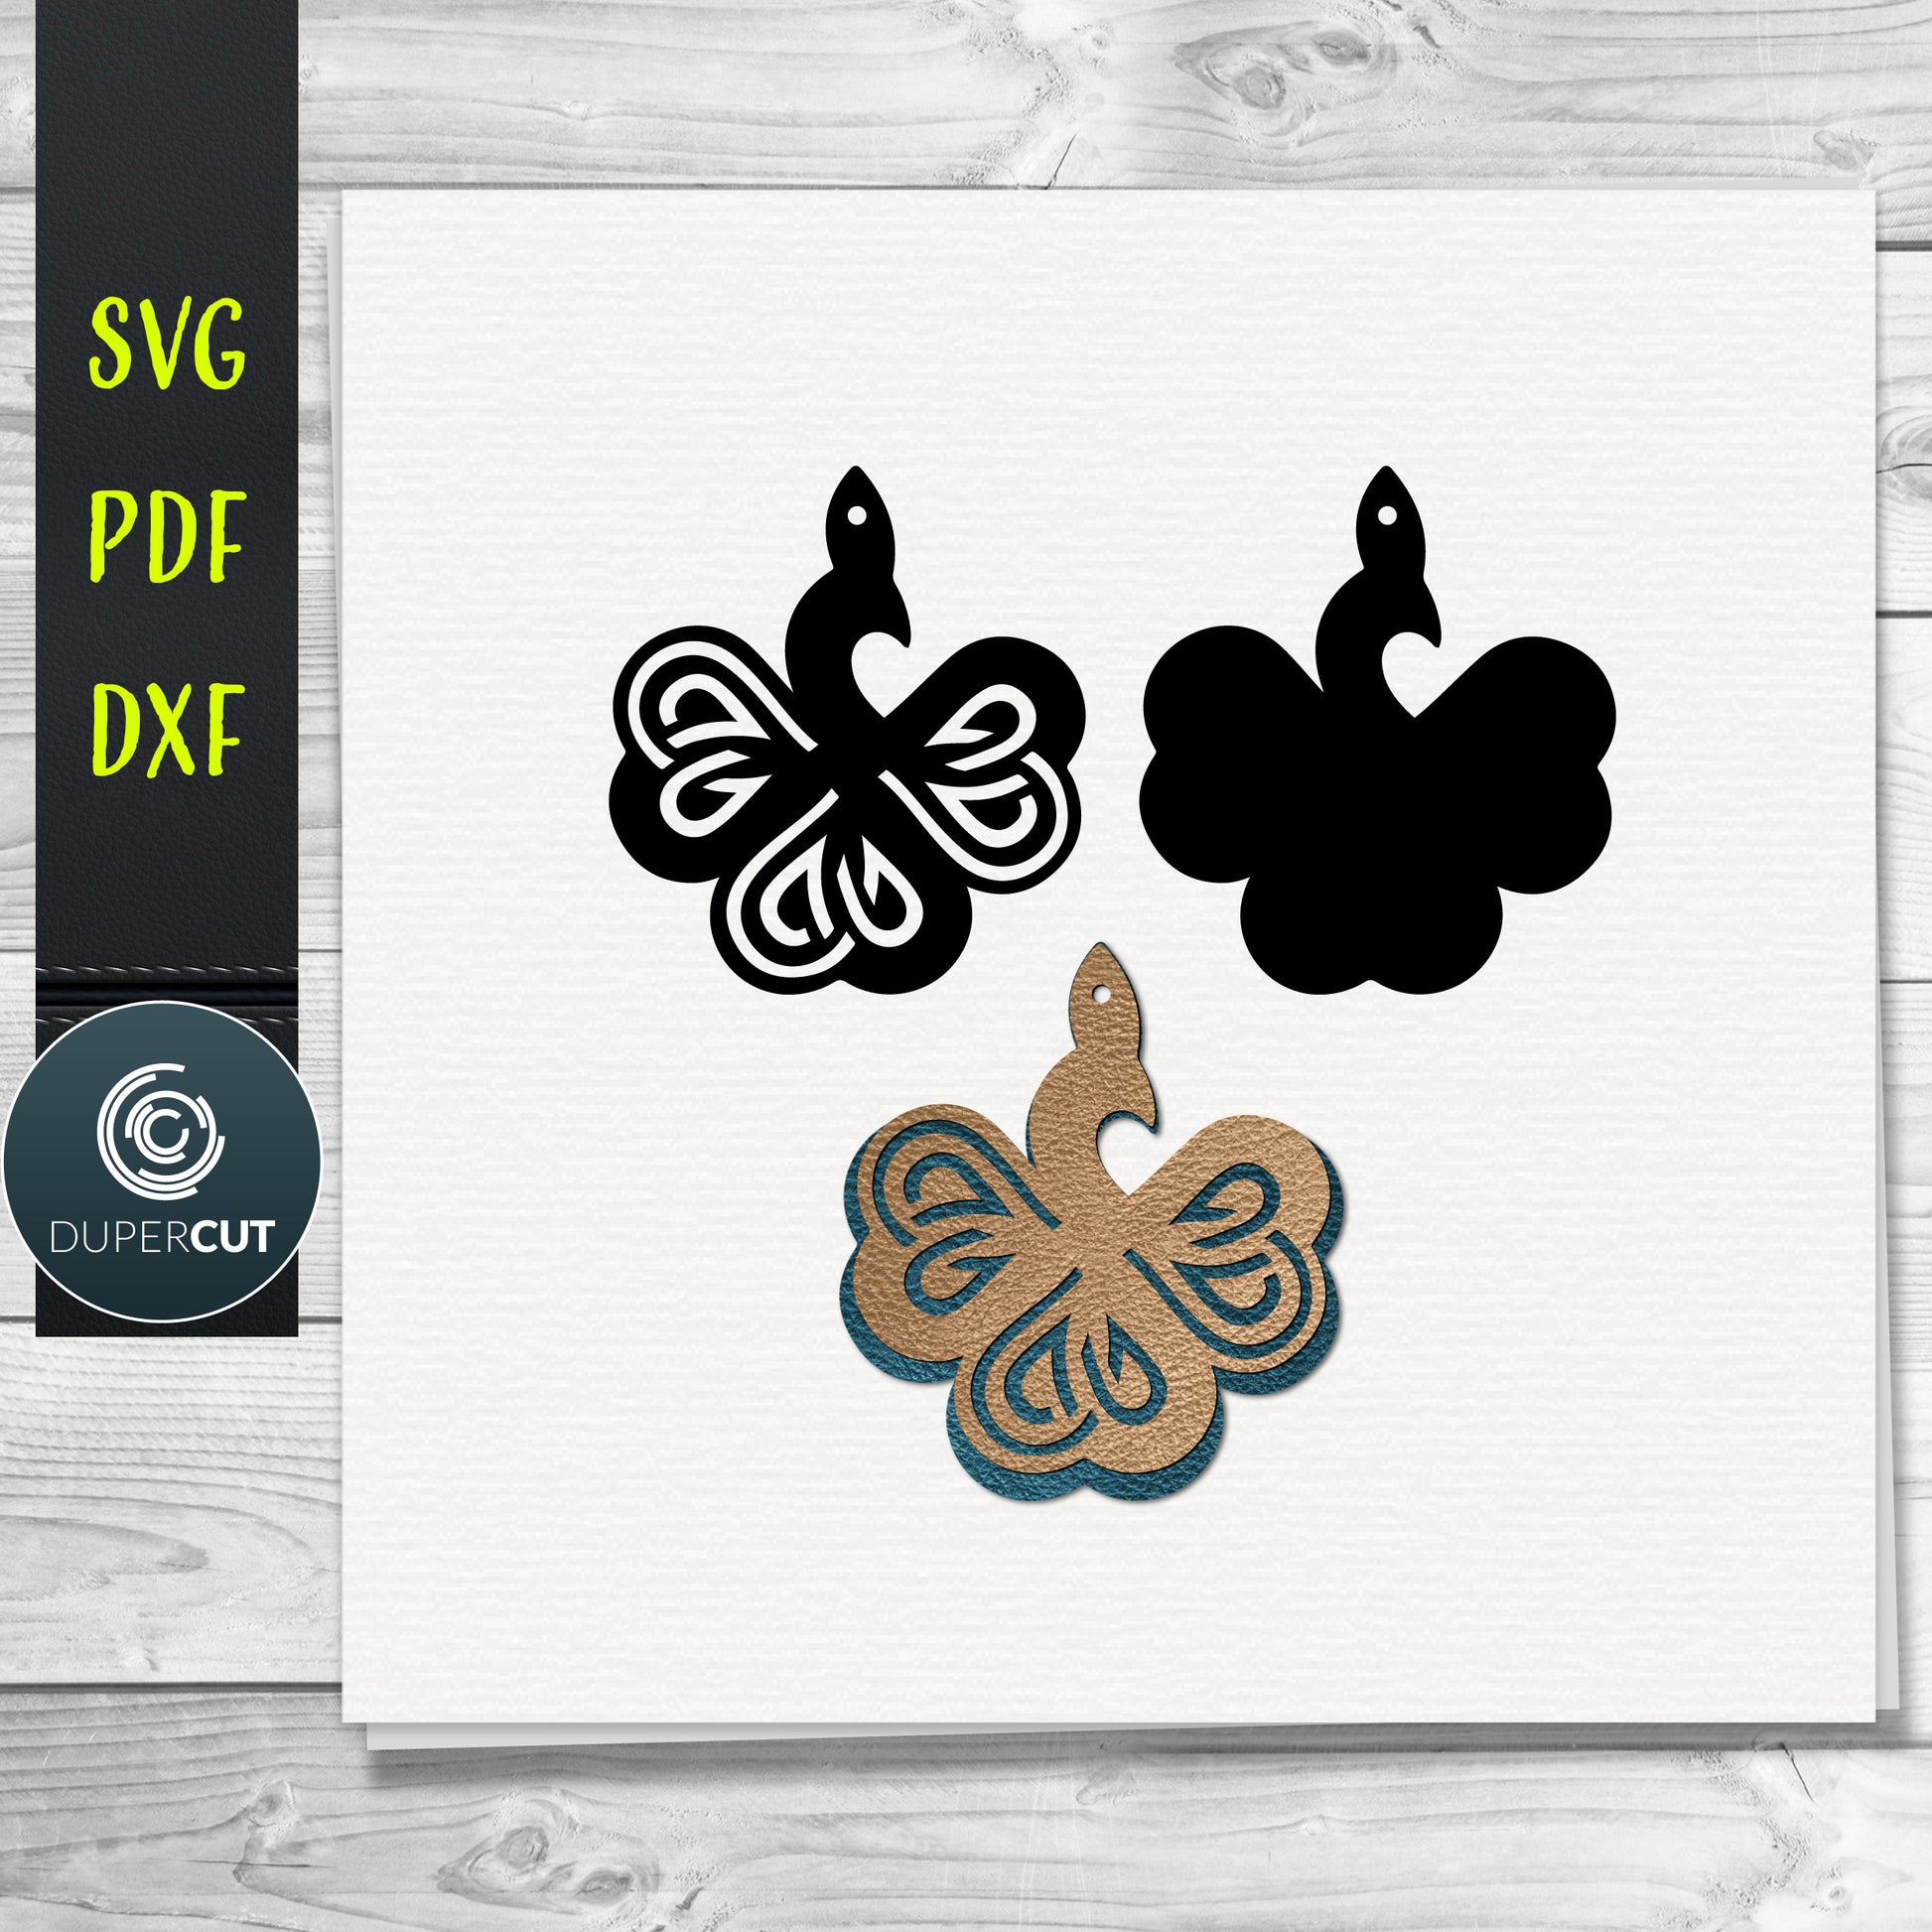 DIY Irish Celtic Shamrock leaf Layered Leather Earrings SVG PDF DXF vector files. Jewellery making template for laser and cutting machines - Glowforge, Cricut, Silhouette Cameo.